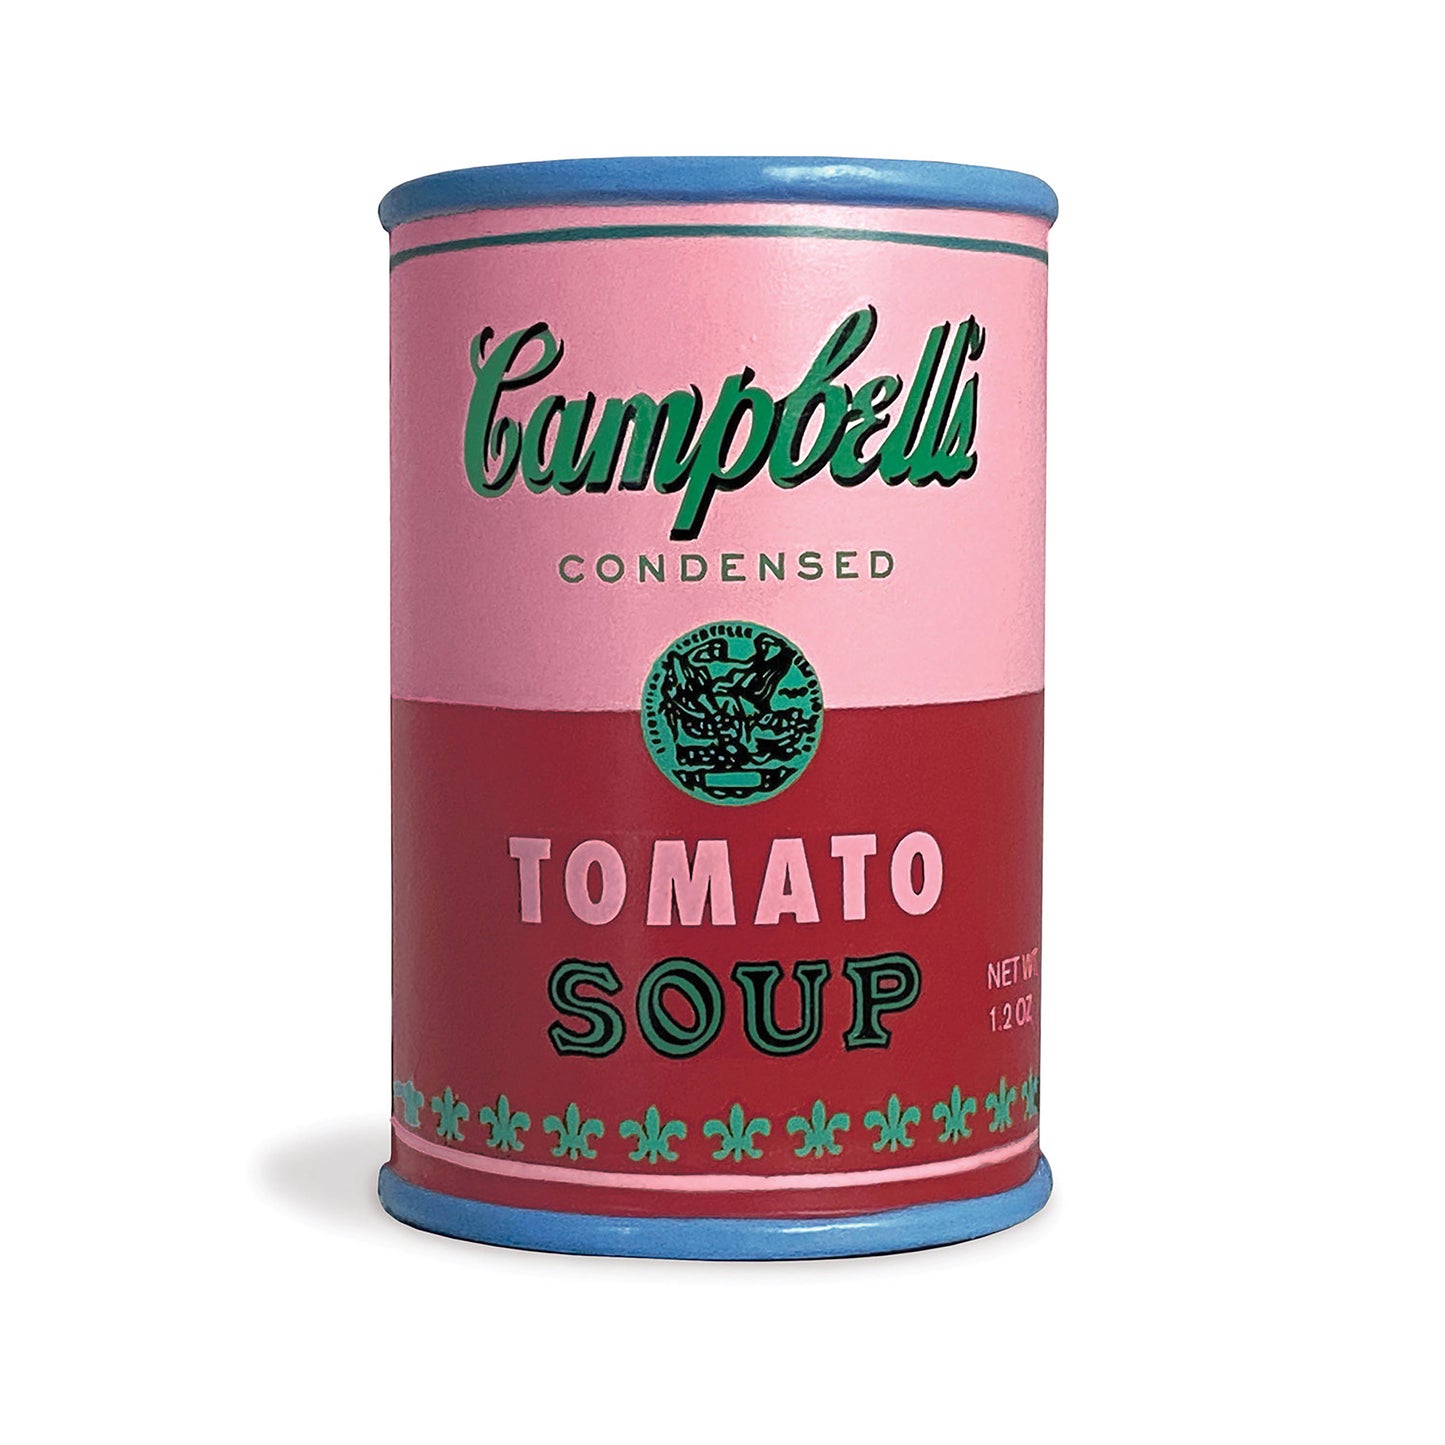 Andy Warhol can soup stress reliever